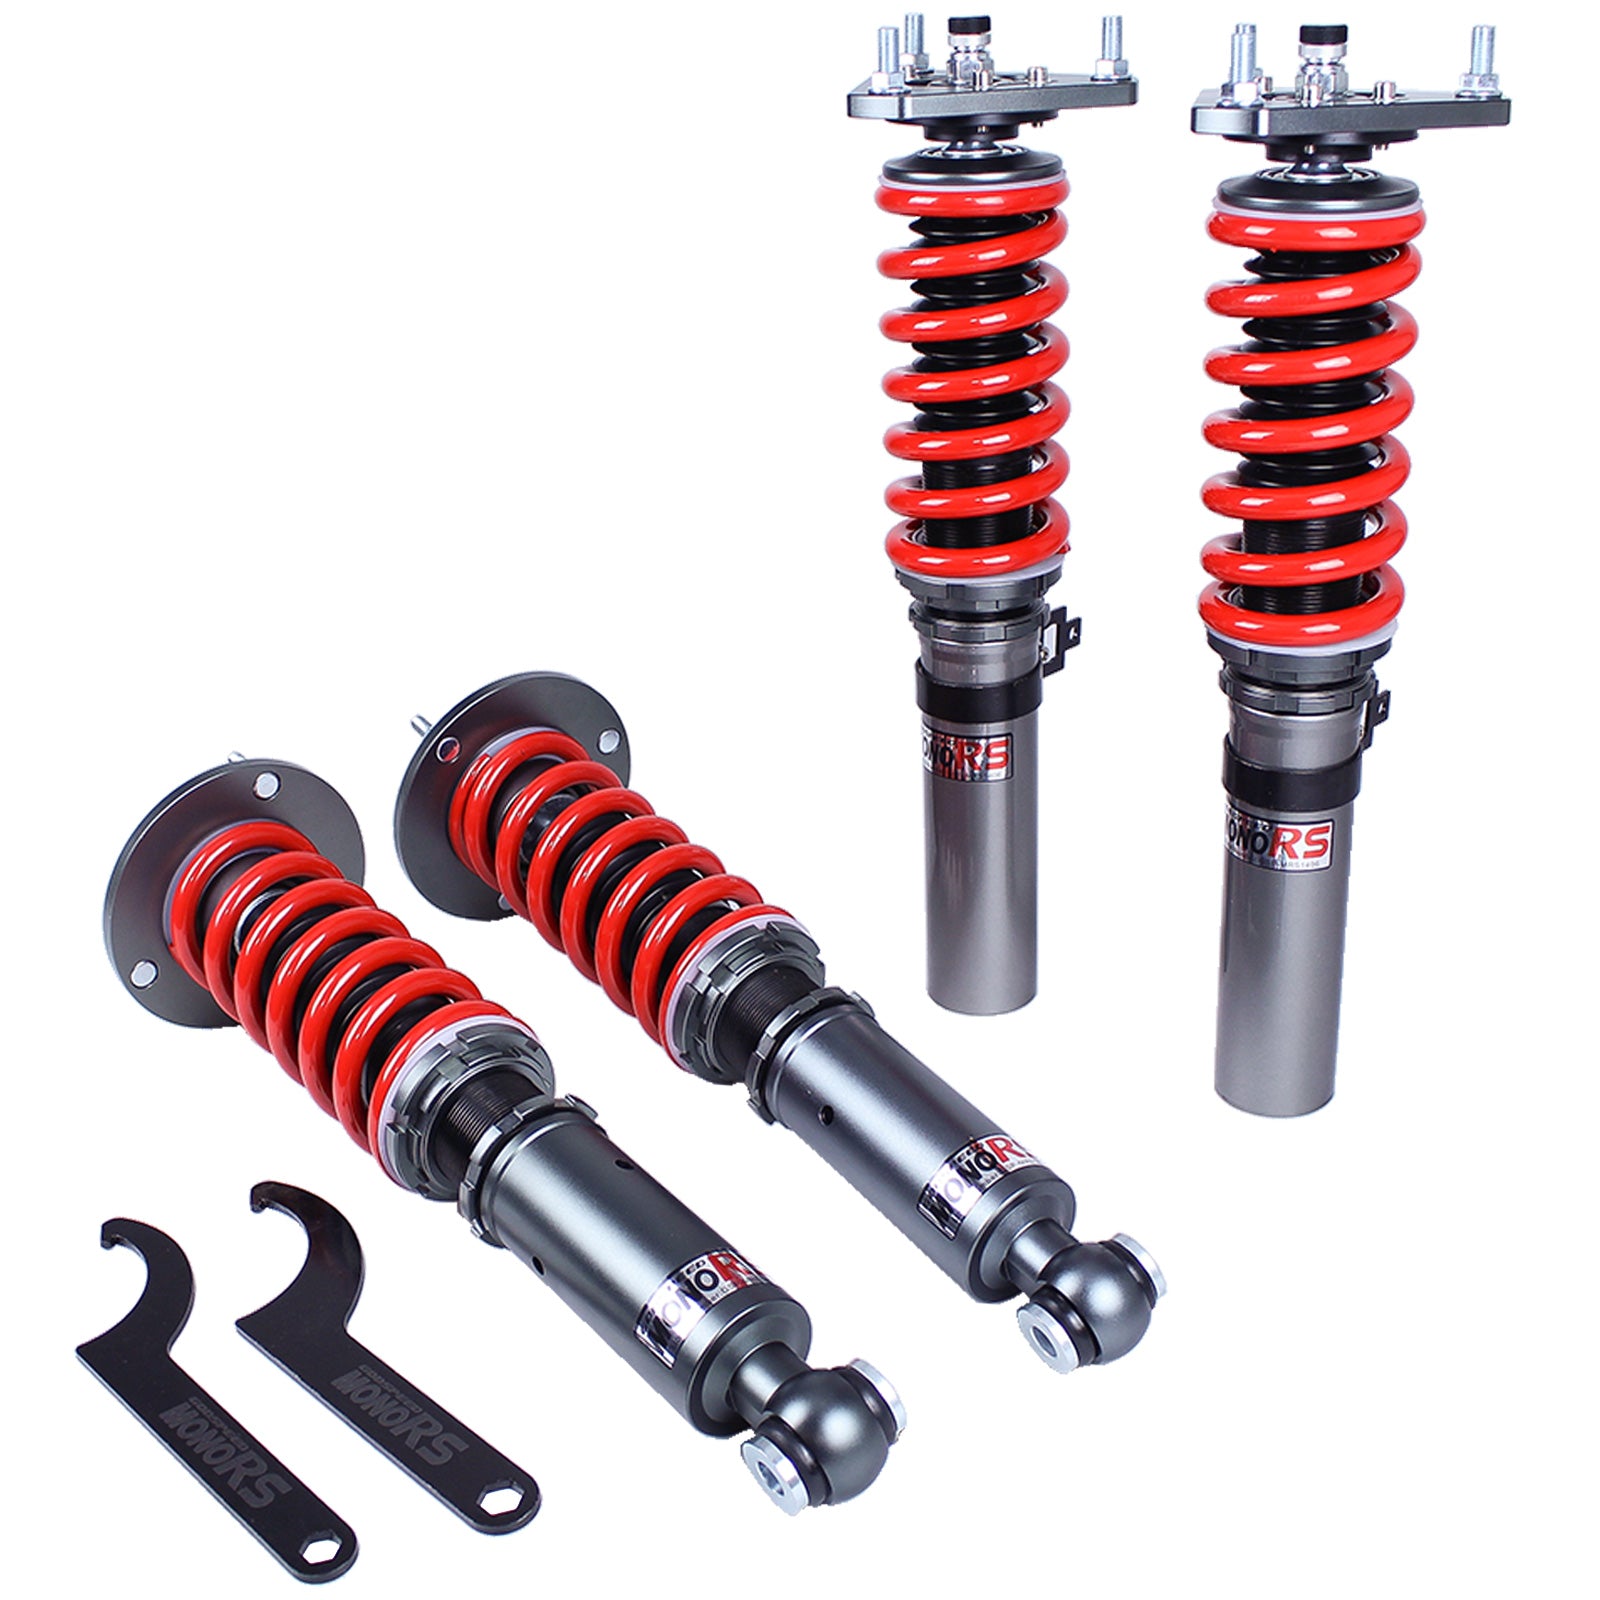 Godspeed MRS1406-B MonoRS Coilover Lowering Kit, 32 Damping Adjustment, Ride Height Adjustable